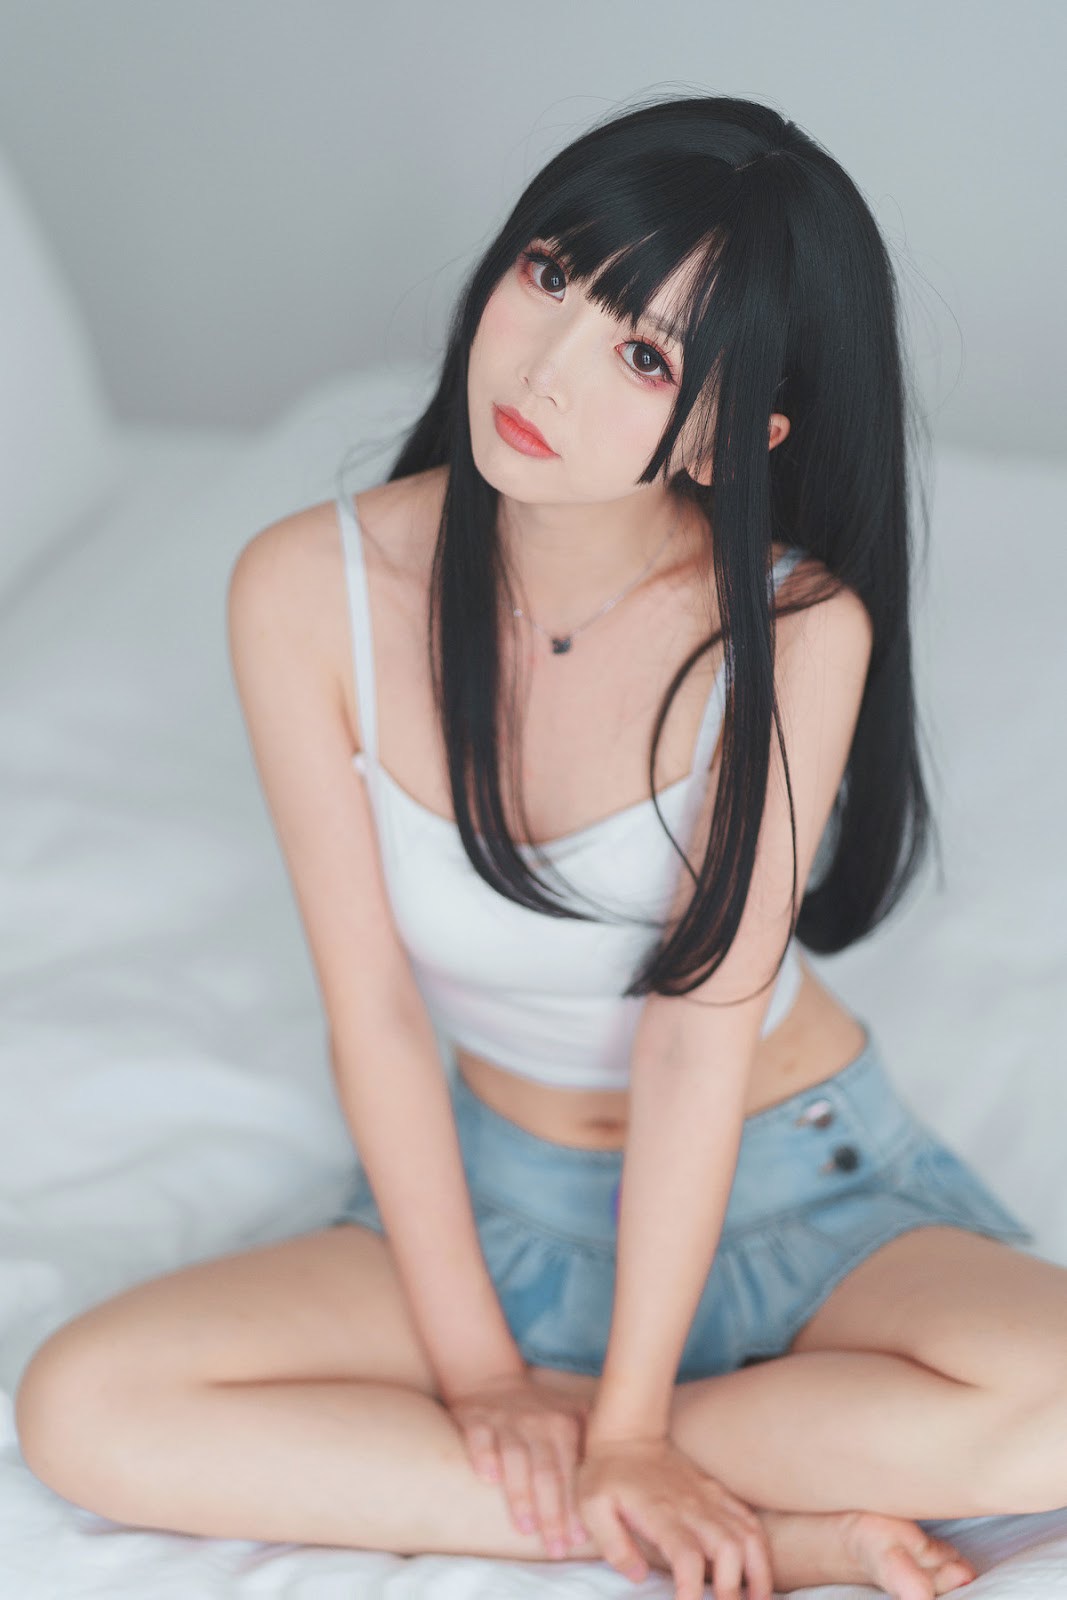 Cosplay 面饼仙儿 可爱女友(1)